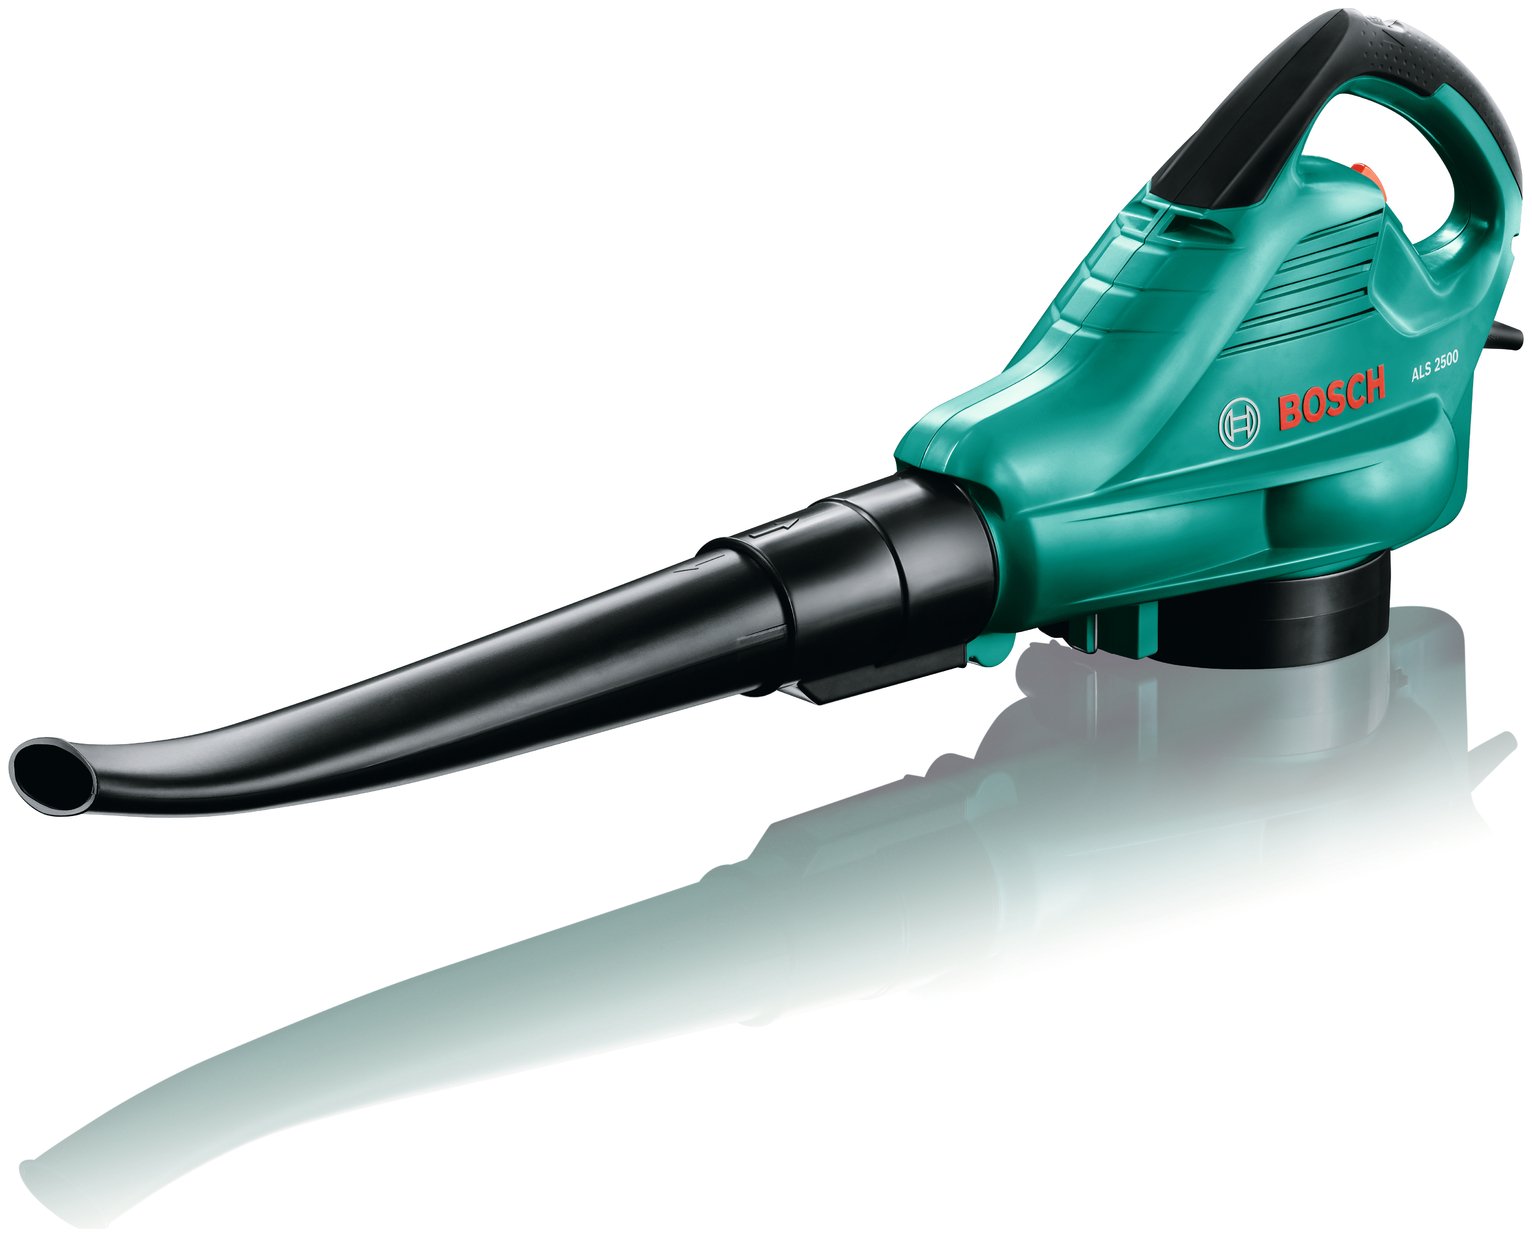 Bosch ALS2500 Corded Leaf Blower and Vac - 2500W